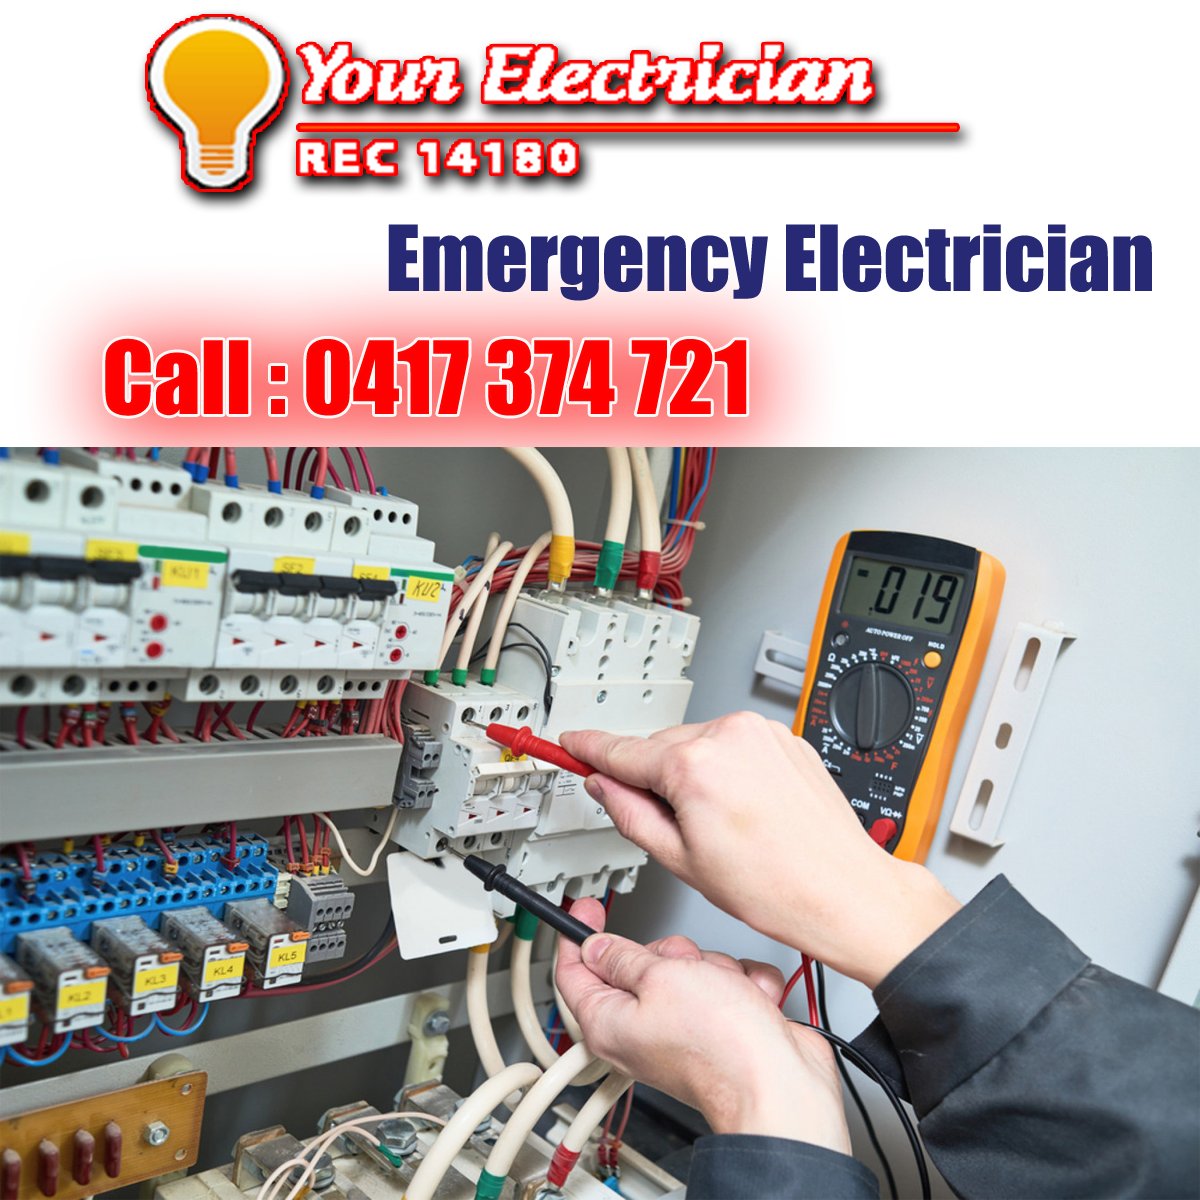 Have a shocking experience?🤩 Call us for help!😎
yourelectricians.com.au
#homerenovation #houseextension #electricians #electrical #sparklife #electricianlife #australia #Melbourne #commercialelectricians #Residentialelectricians #Domesticelectricians #Tweet #Wednesday